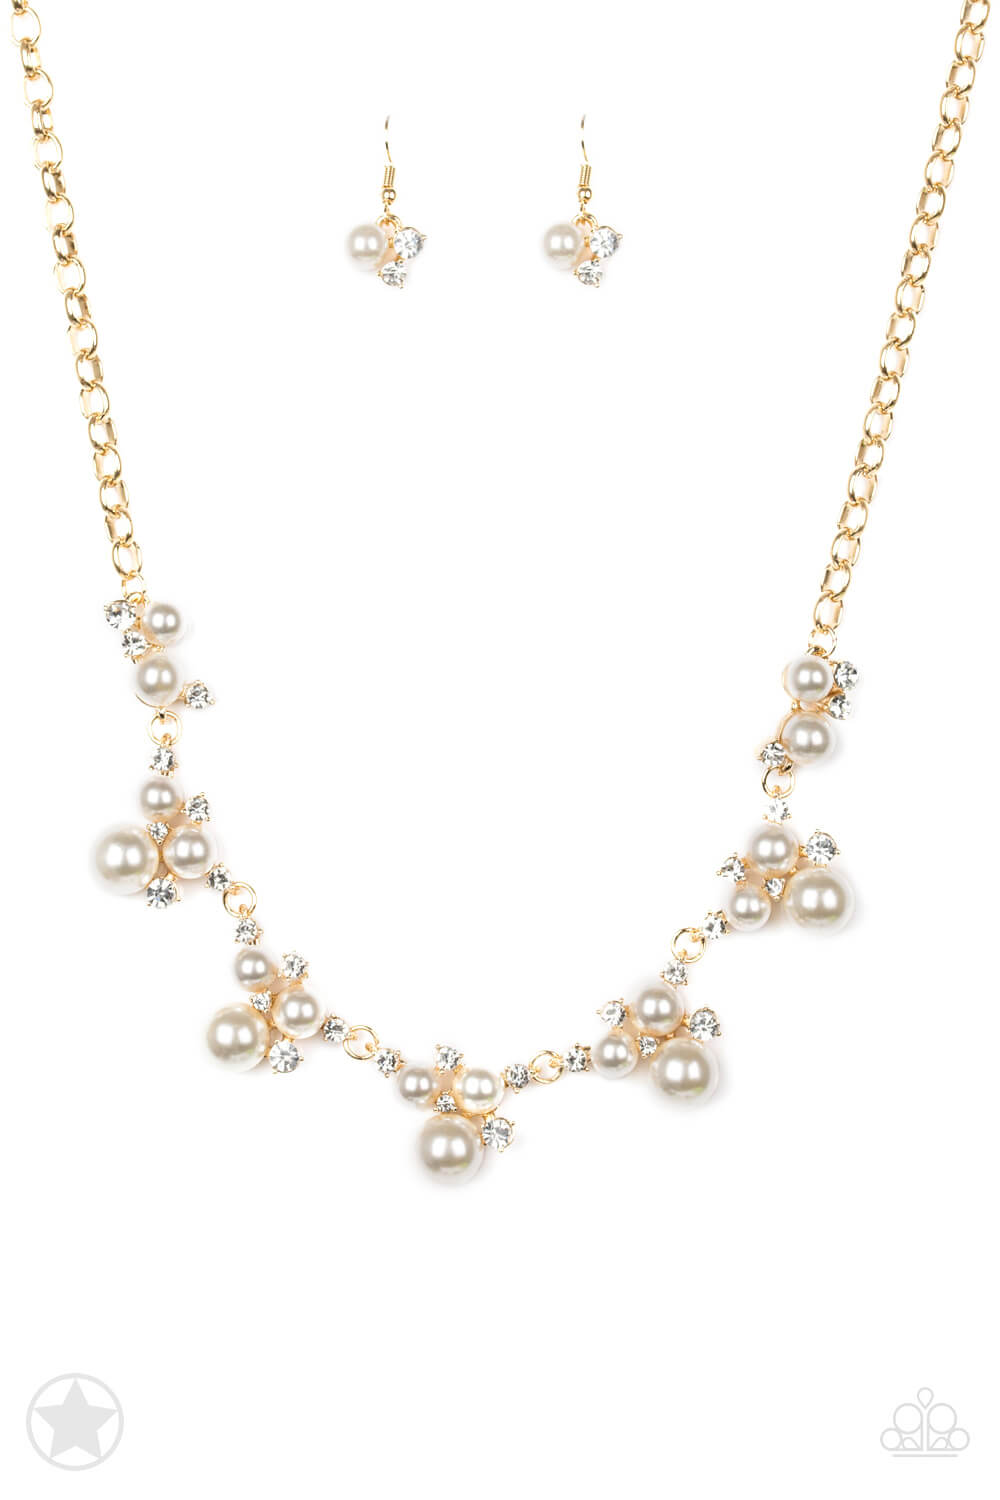 Toast To Perfection Gold & White Pearl Necklace Set - Princess Glam Shop